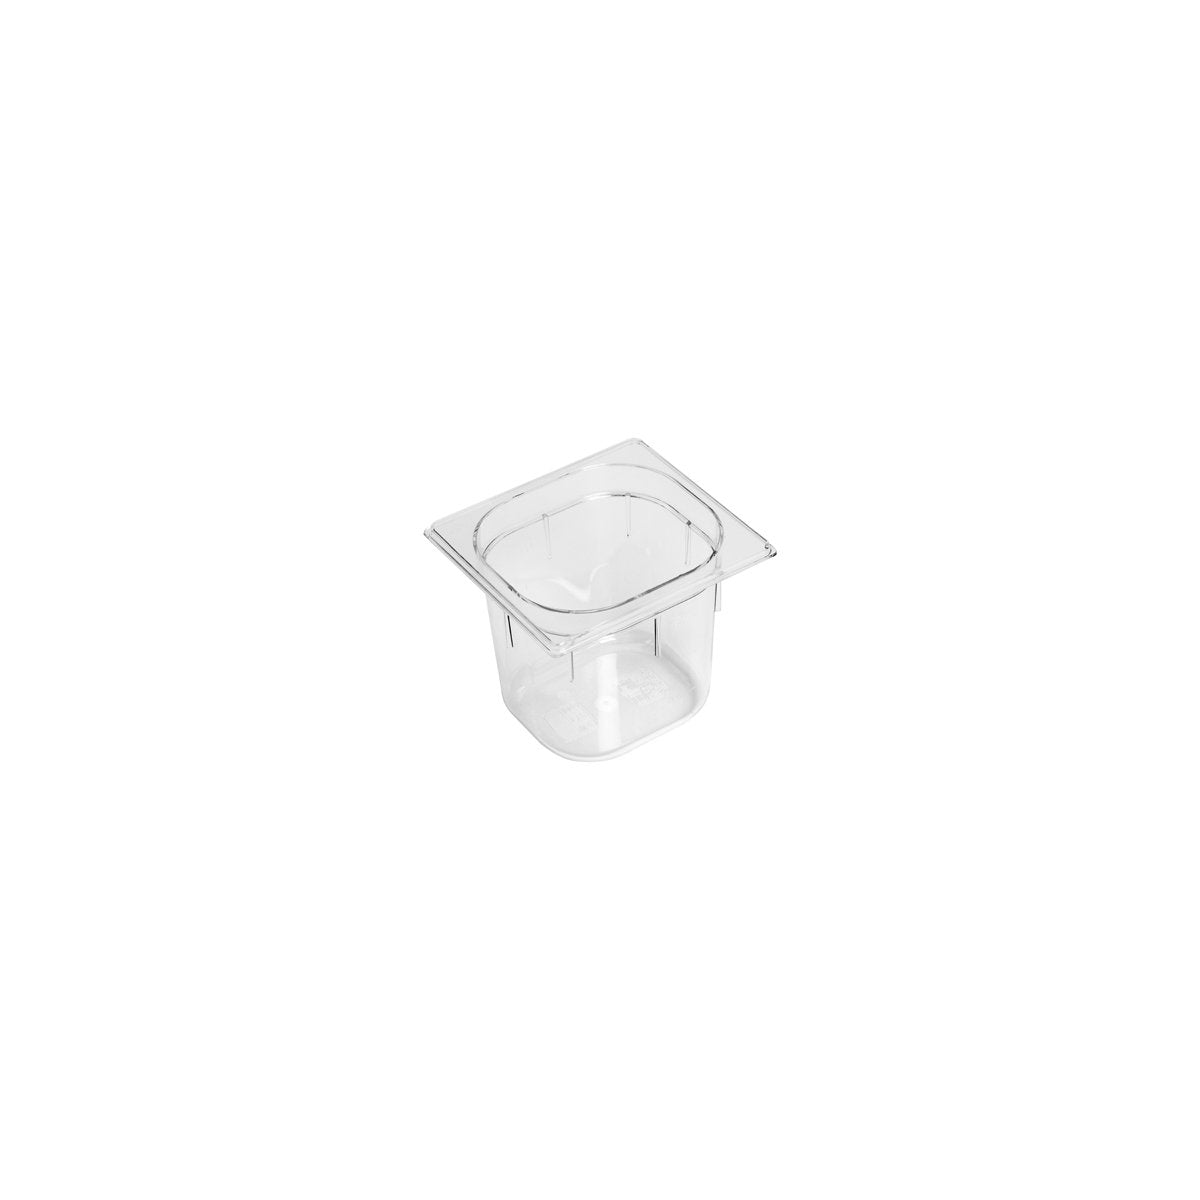 PC-16150CL Inox Macel Gastronorm Pan Polycarbonate onate Clear 1/6 Size 150mm Tomkin Australia Hospitality Supplies